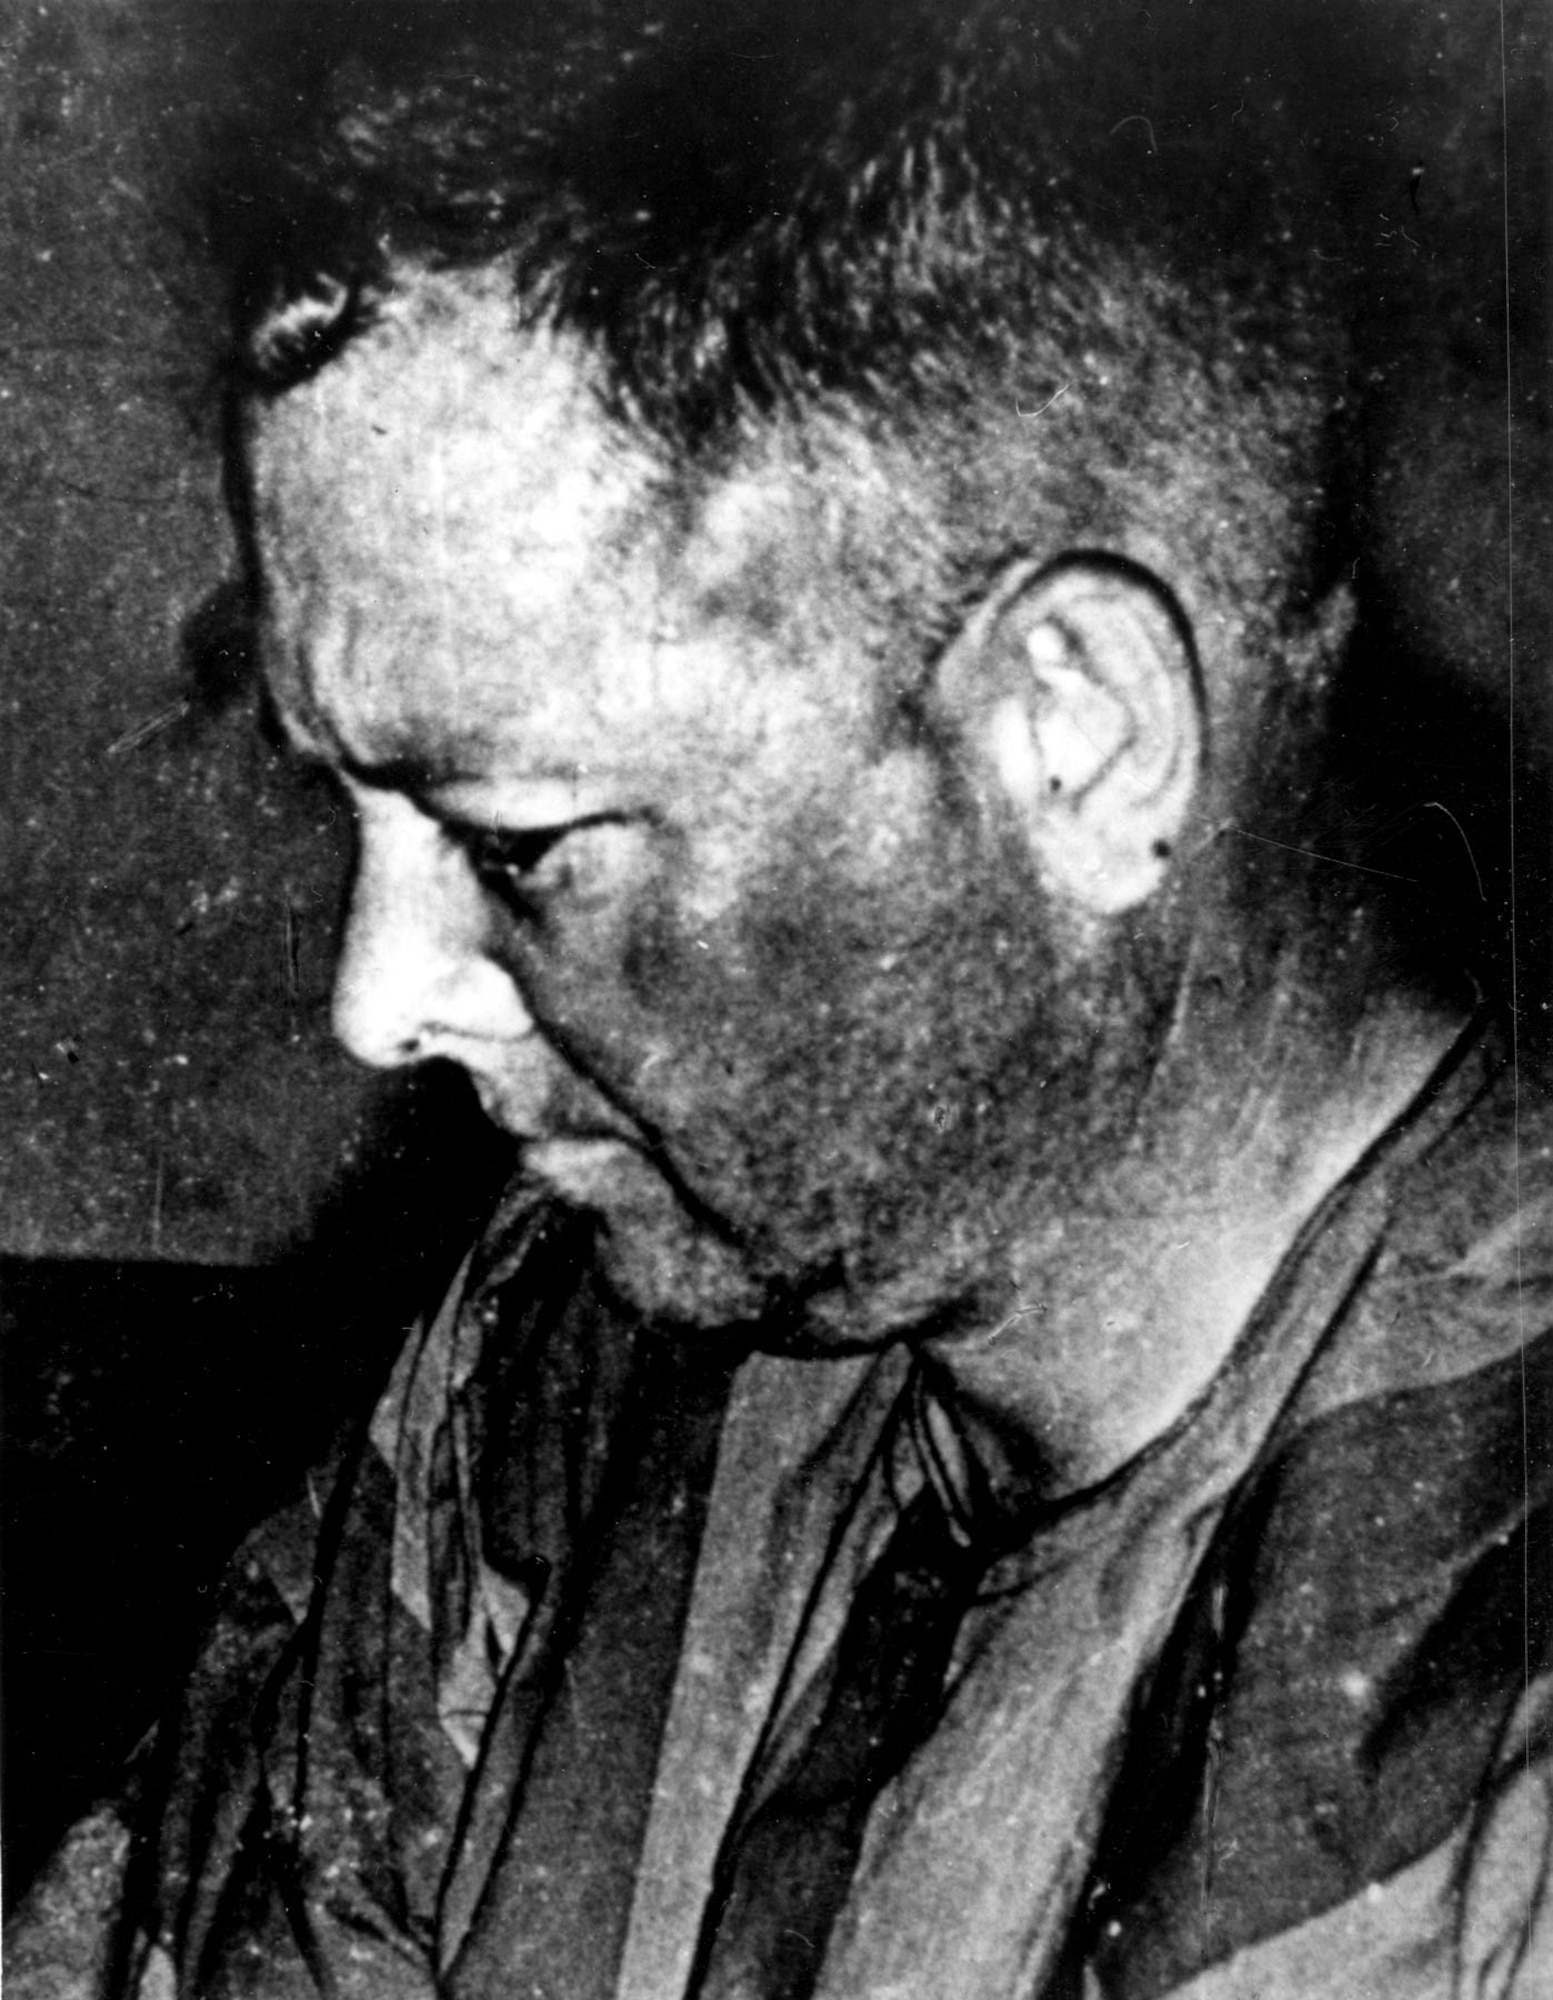 USAF Capt. Edwin Atterberry, captured Aug. 12, 1967. He was beaten to death in captivity for trying to escape. (U.S. Air Force)